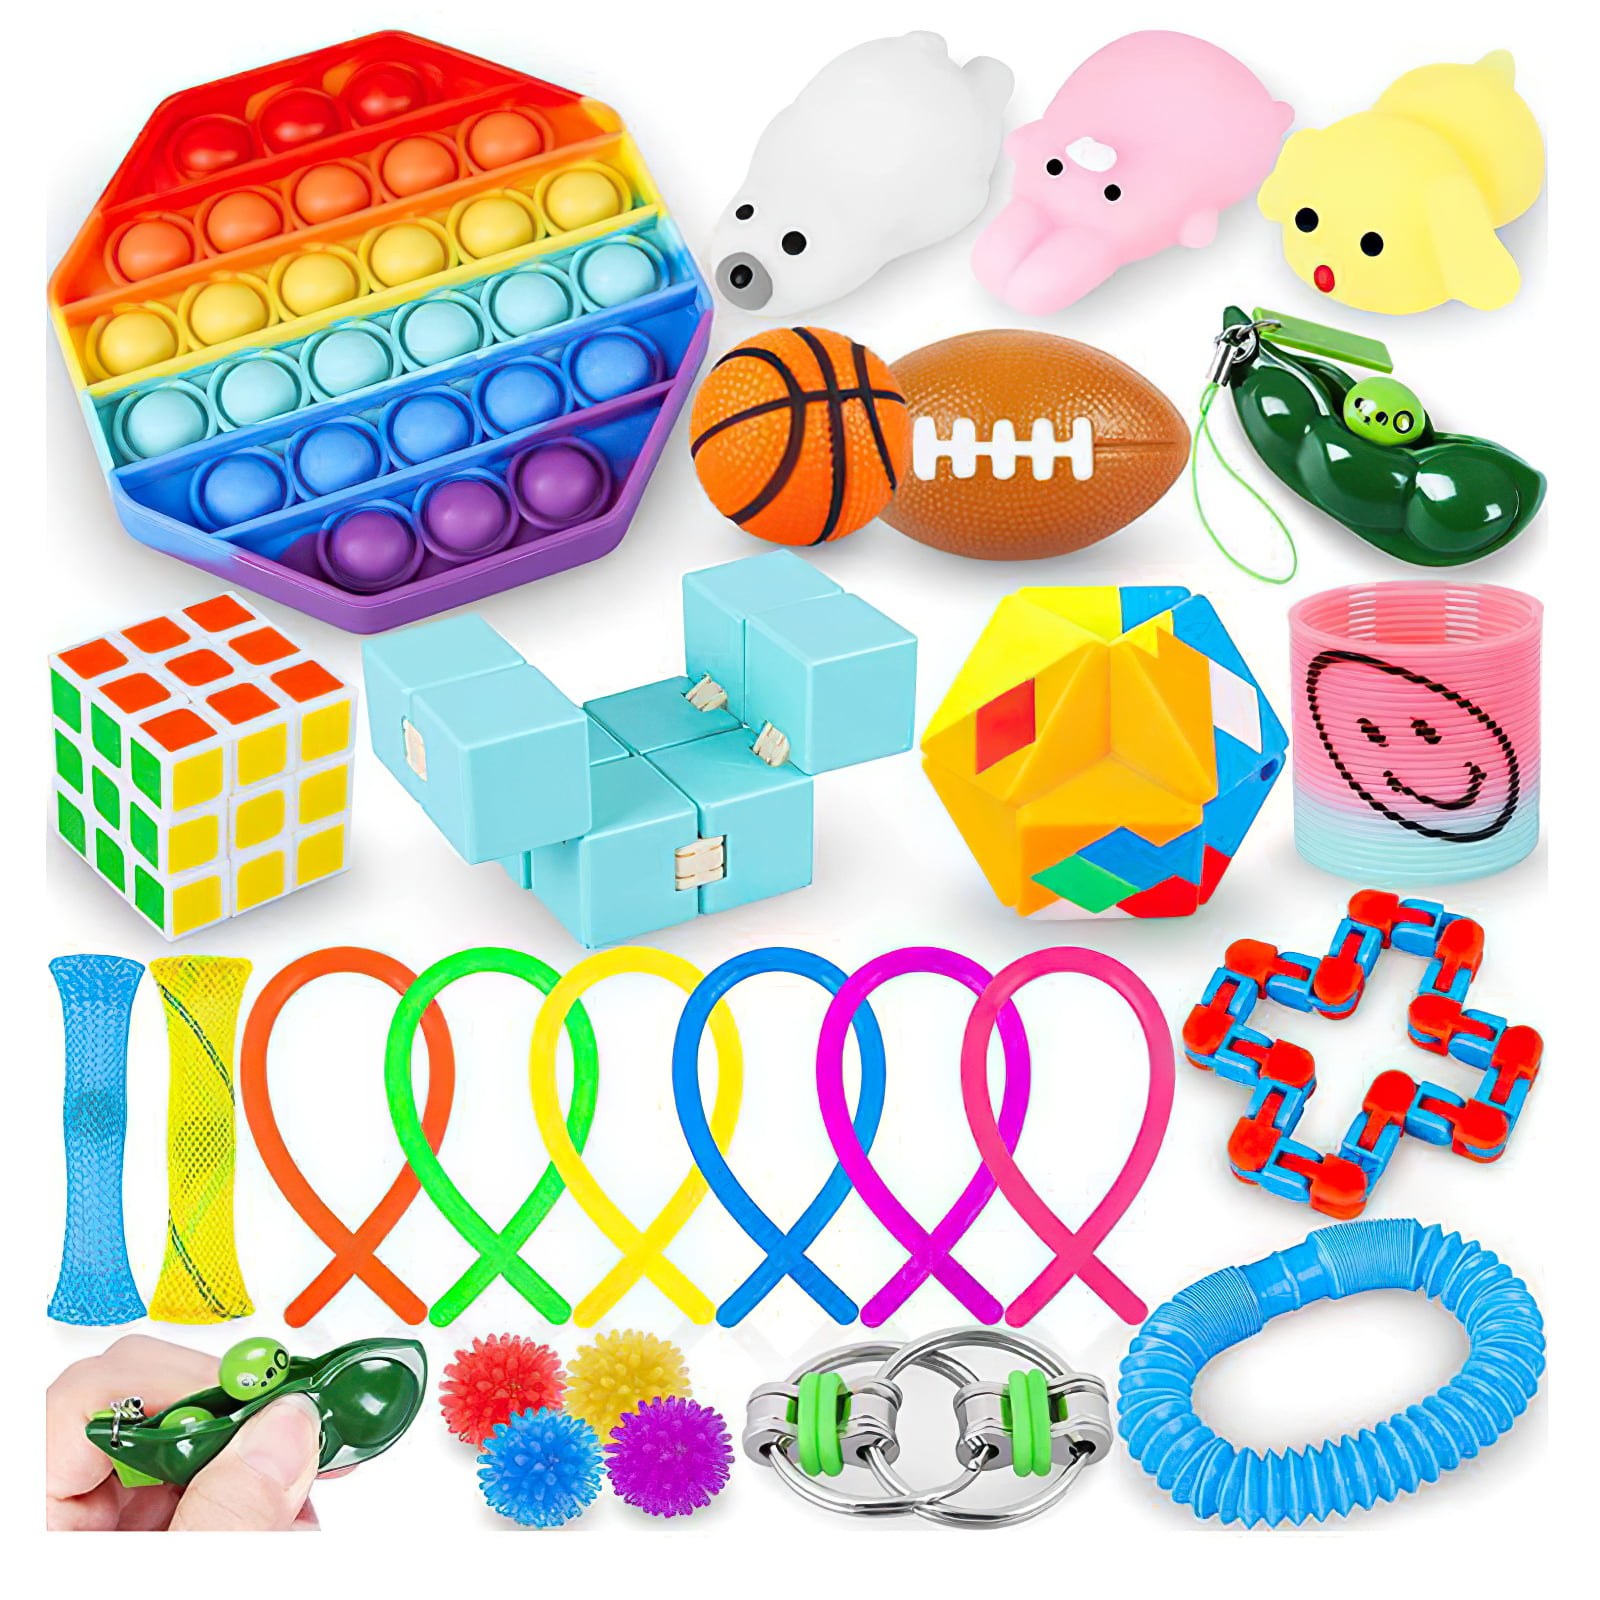 29PACK Fidget Sensory Toy Set Stress Relief Toys Anxiety Relief kids fun Game UK 